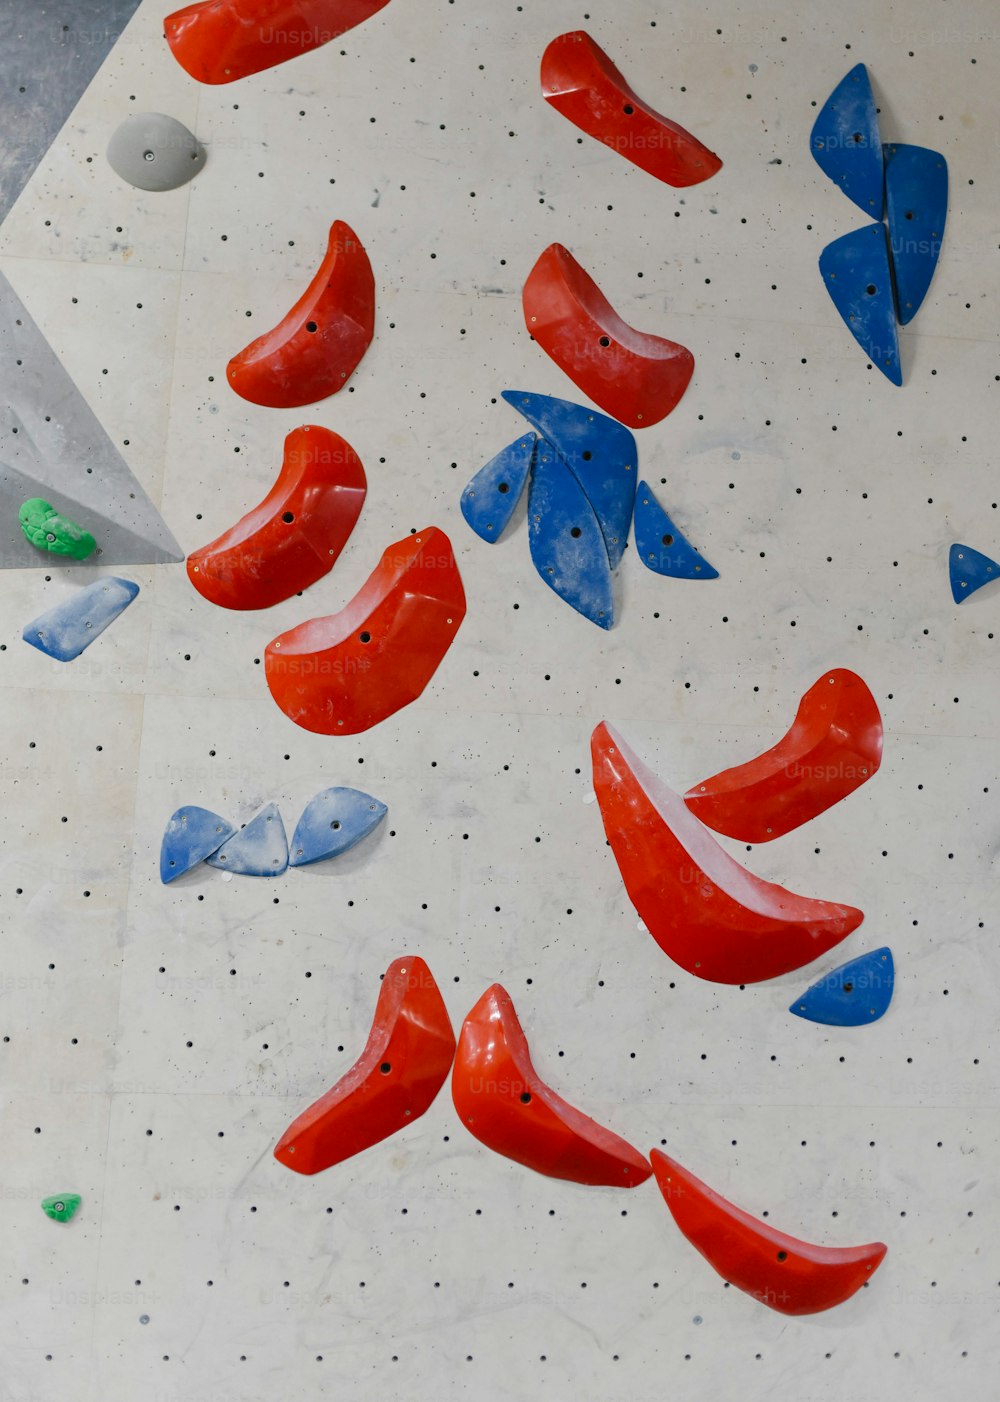 a climbing wall with red, blue, and green climbing equipment